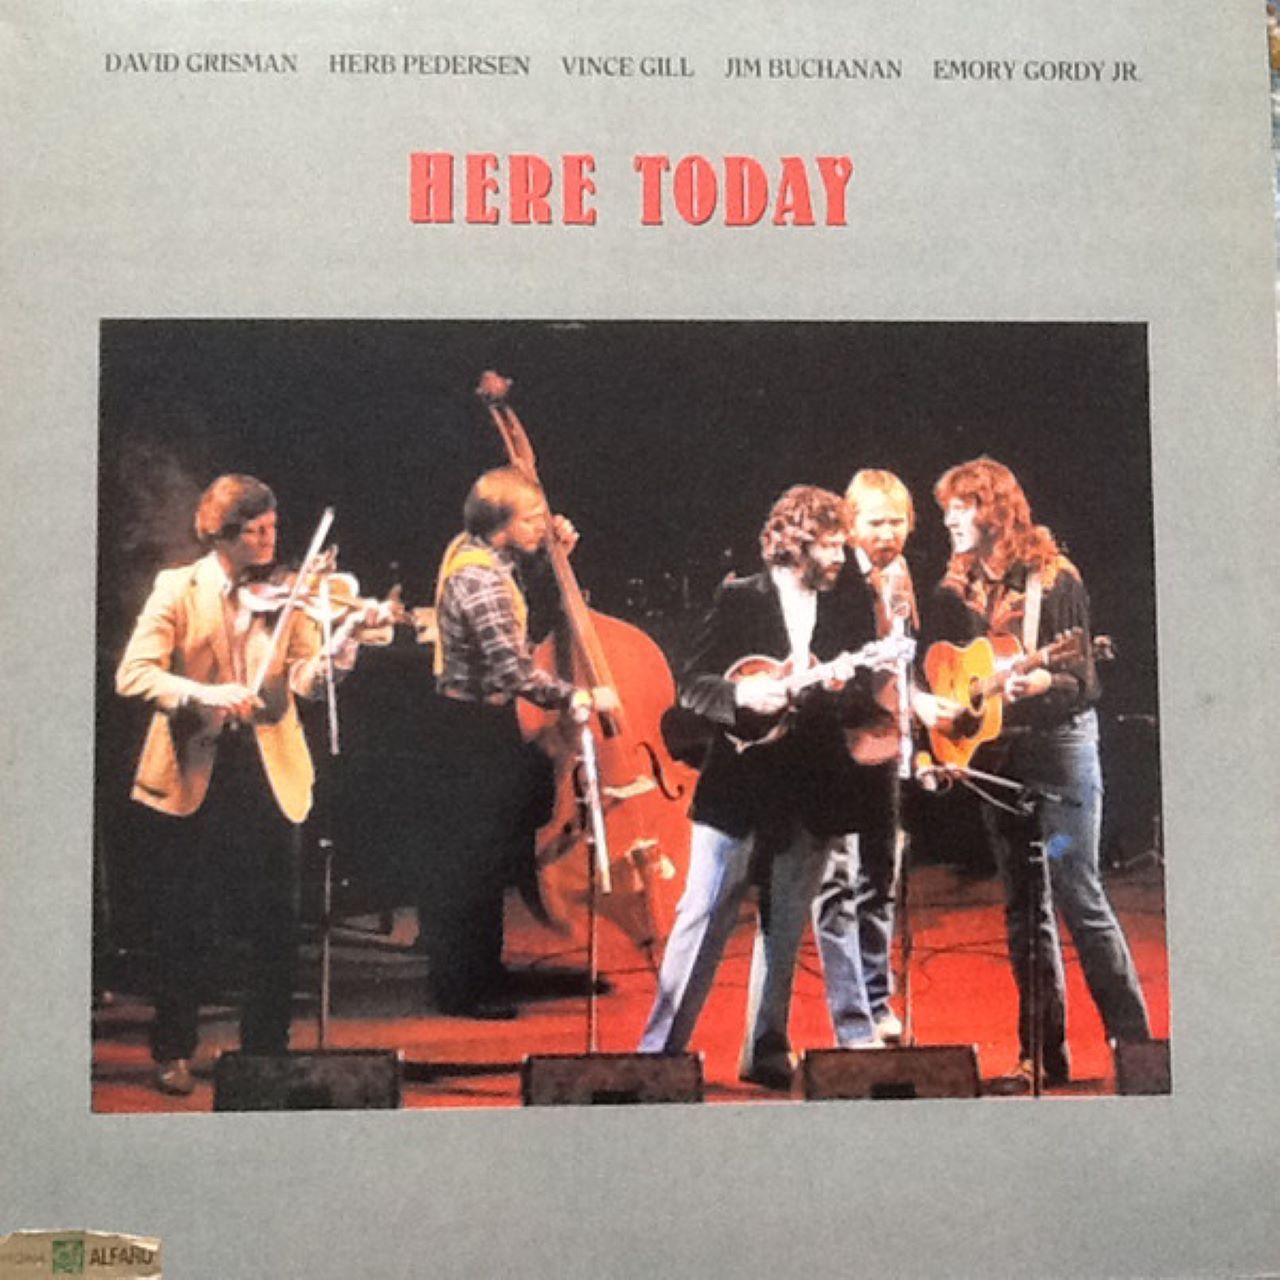 Here Today - Here Today cover album